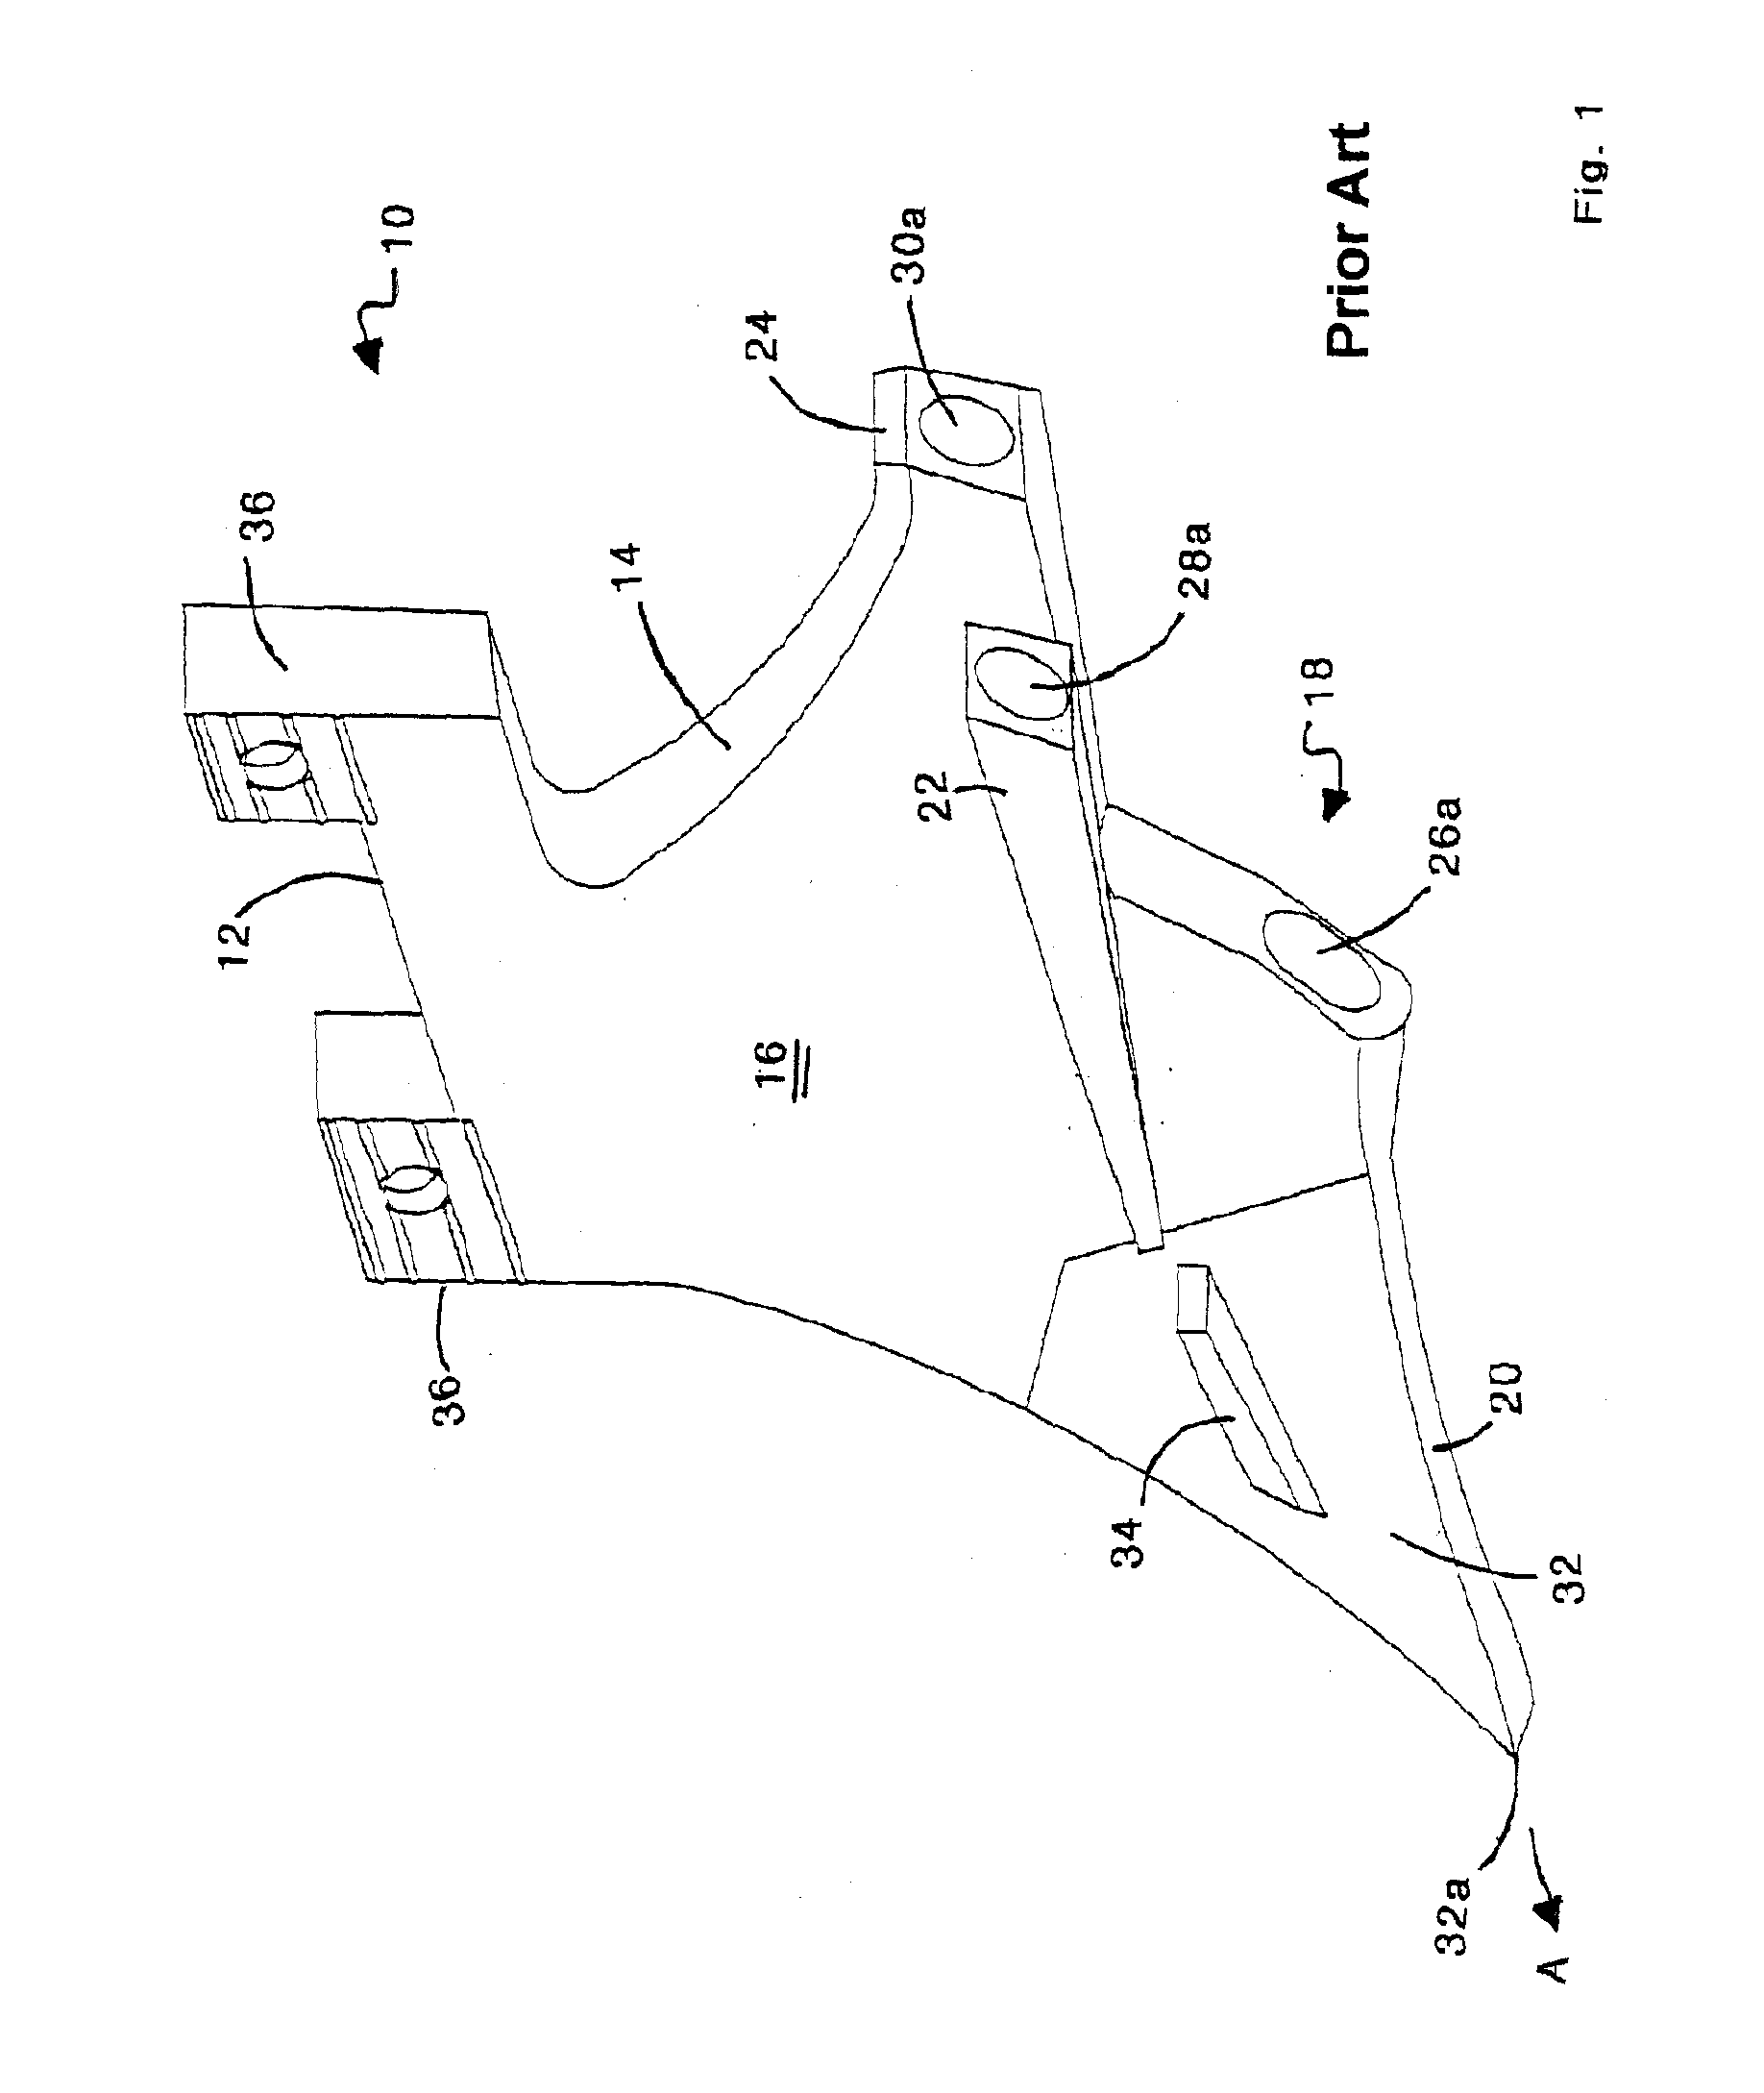 A system for variable-ratio blending of multiple agricultural products for delivery via a ported opener